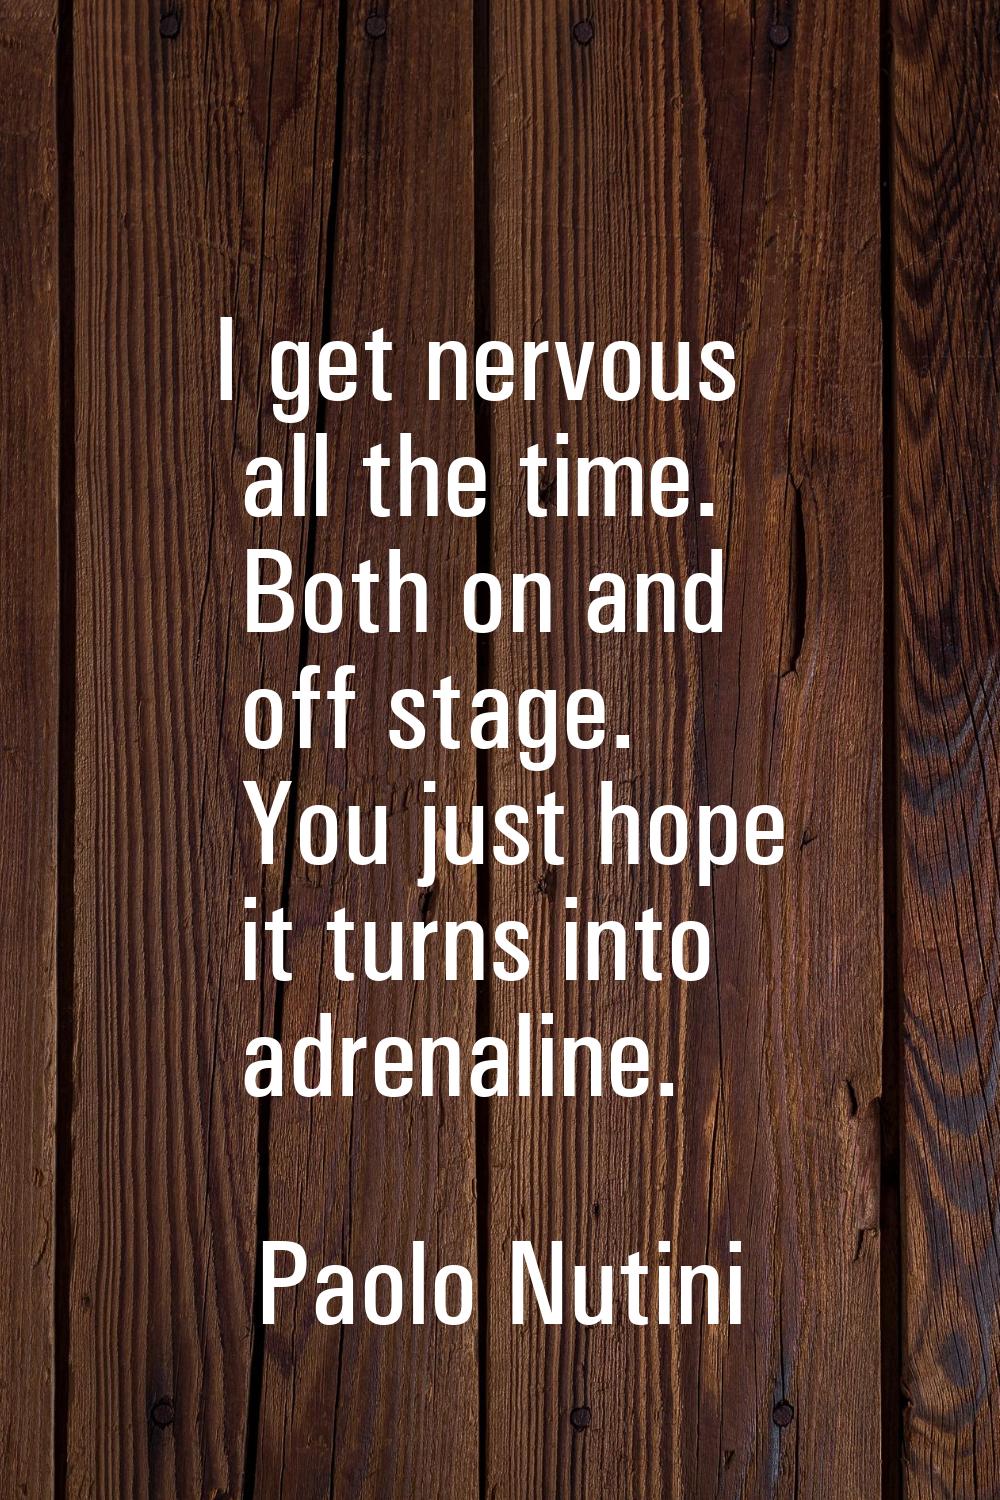 I get nervous all the time. Both on and off stage. You just hope it turns into adrenaline.